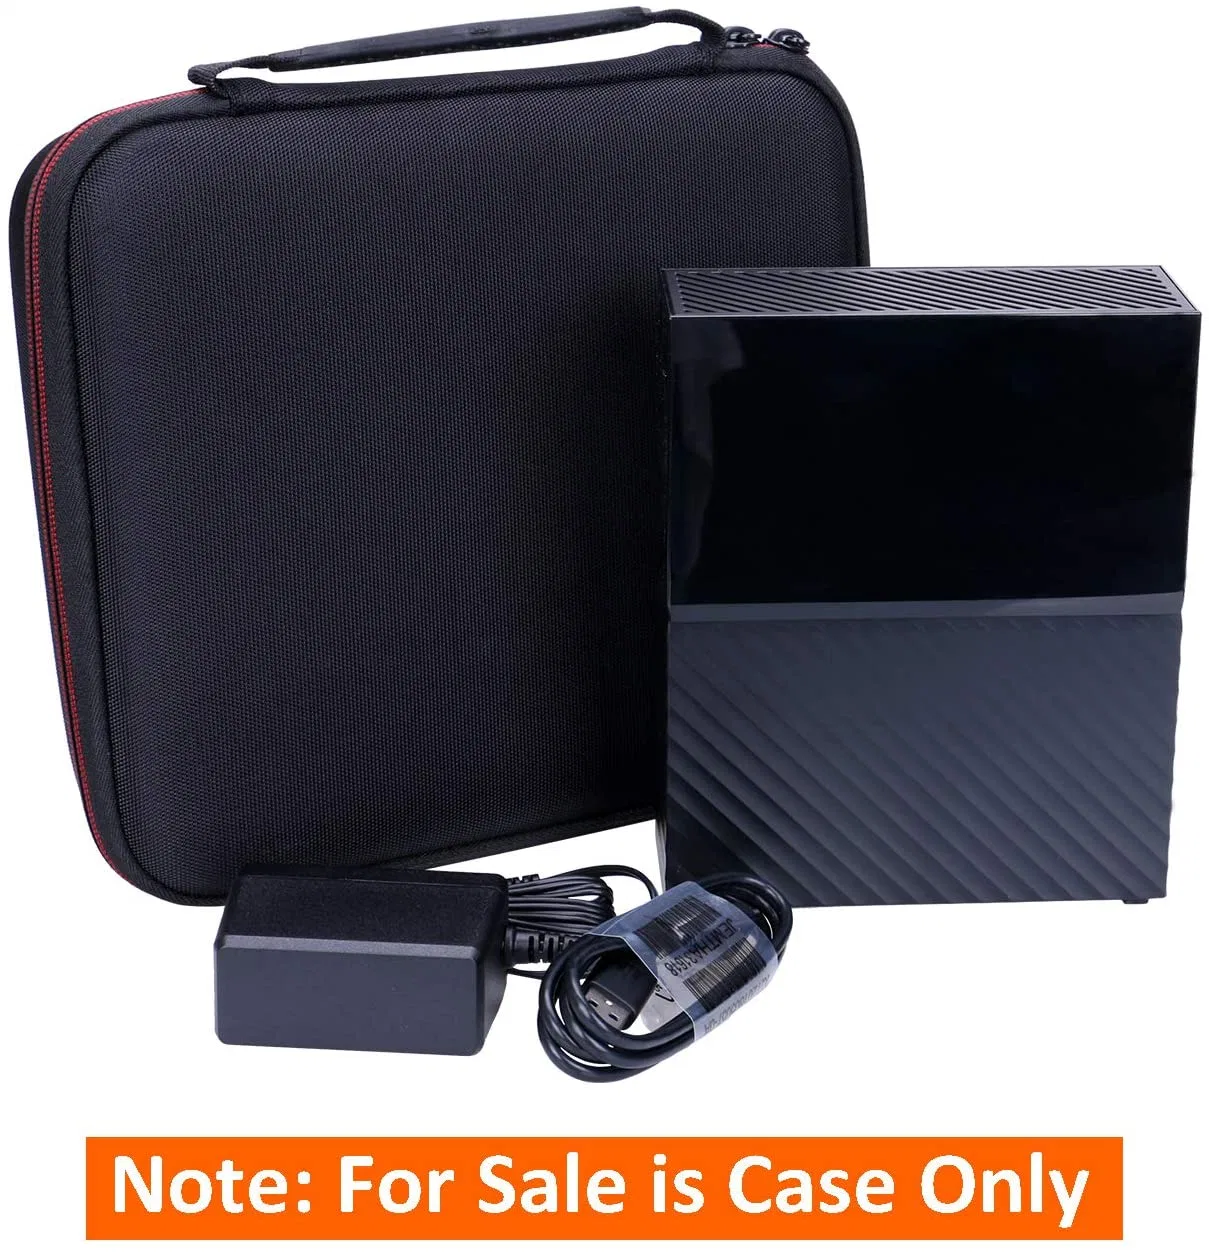 Protective Carrying Zipper Travel Waterproof Shockproof Smell Proof Nylon Tools EVA Storage Box Pouch Packing EVA Bags Case for Hard Drive